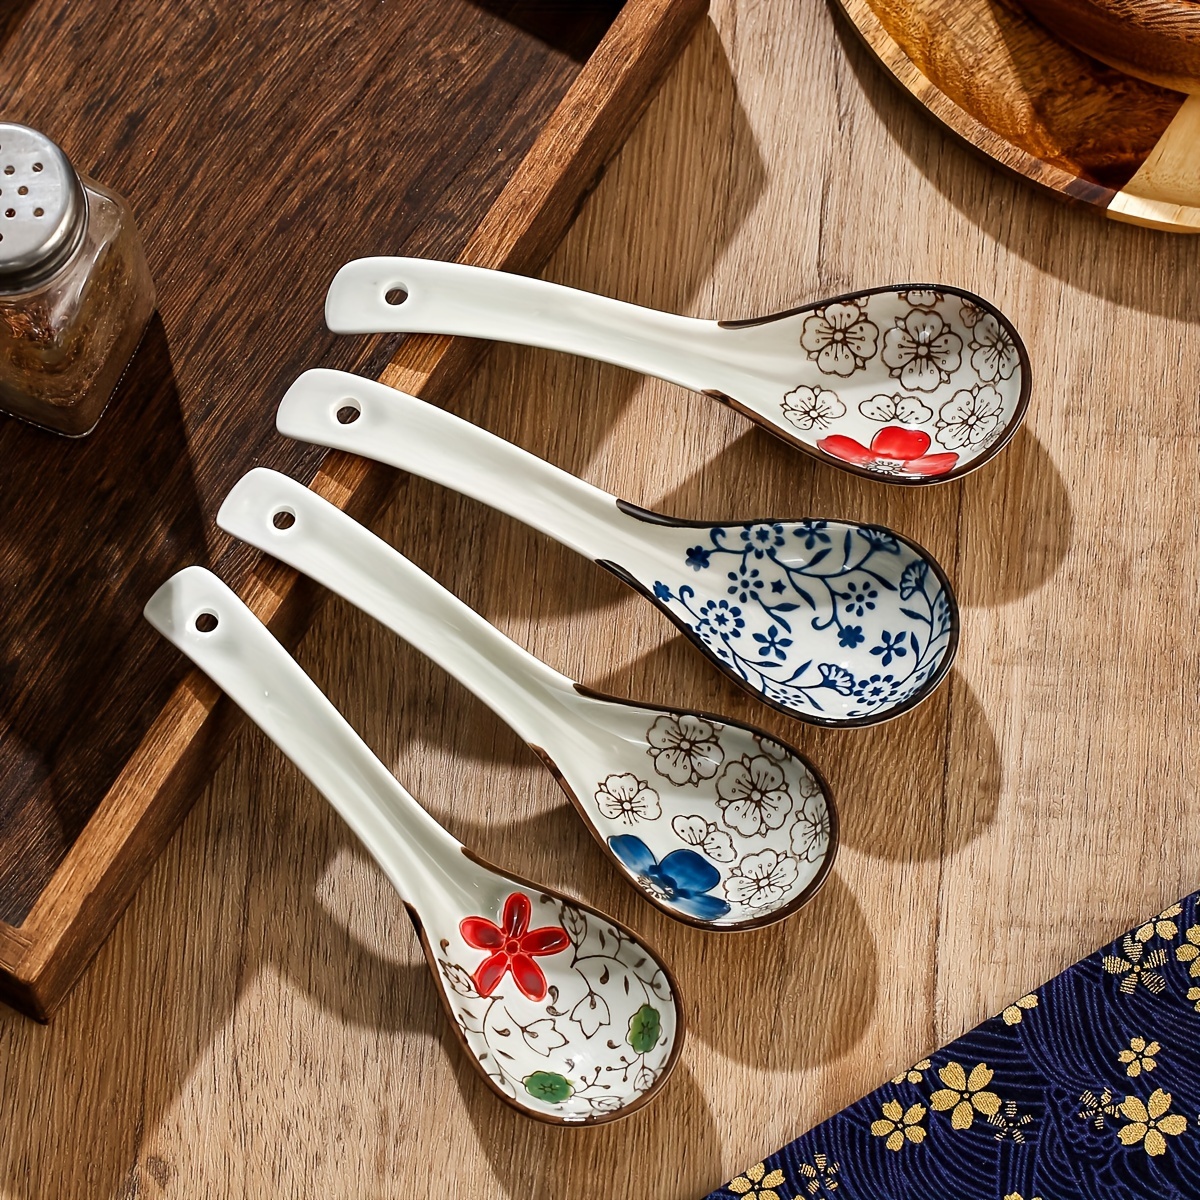 Table Dinner Spoons Chinese Retro Style Bump Texture Ceramic Spoon  Porcelain Coffee Soup Spoon Tableware Kitchen Utensils Tea Spoon Coffee  Spoon